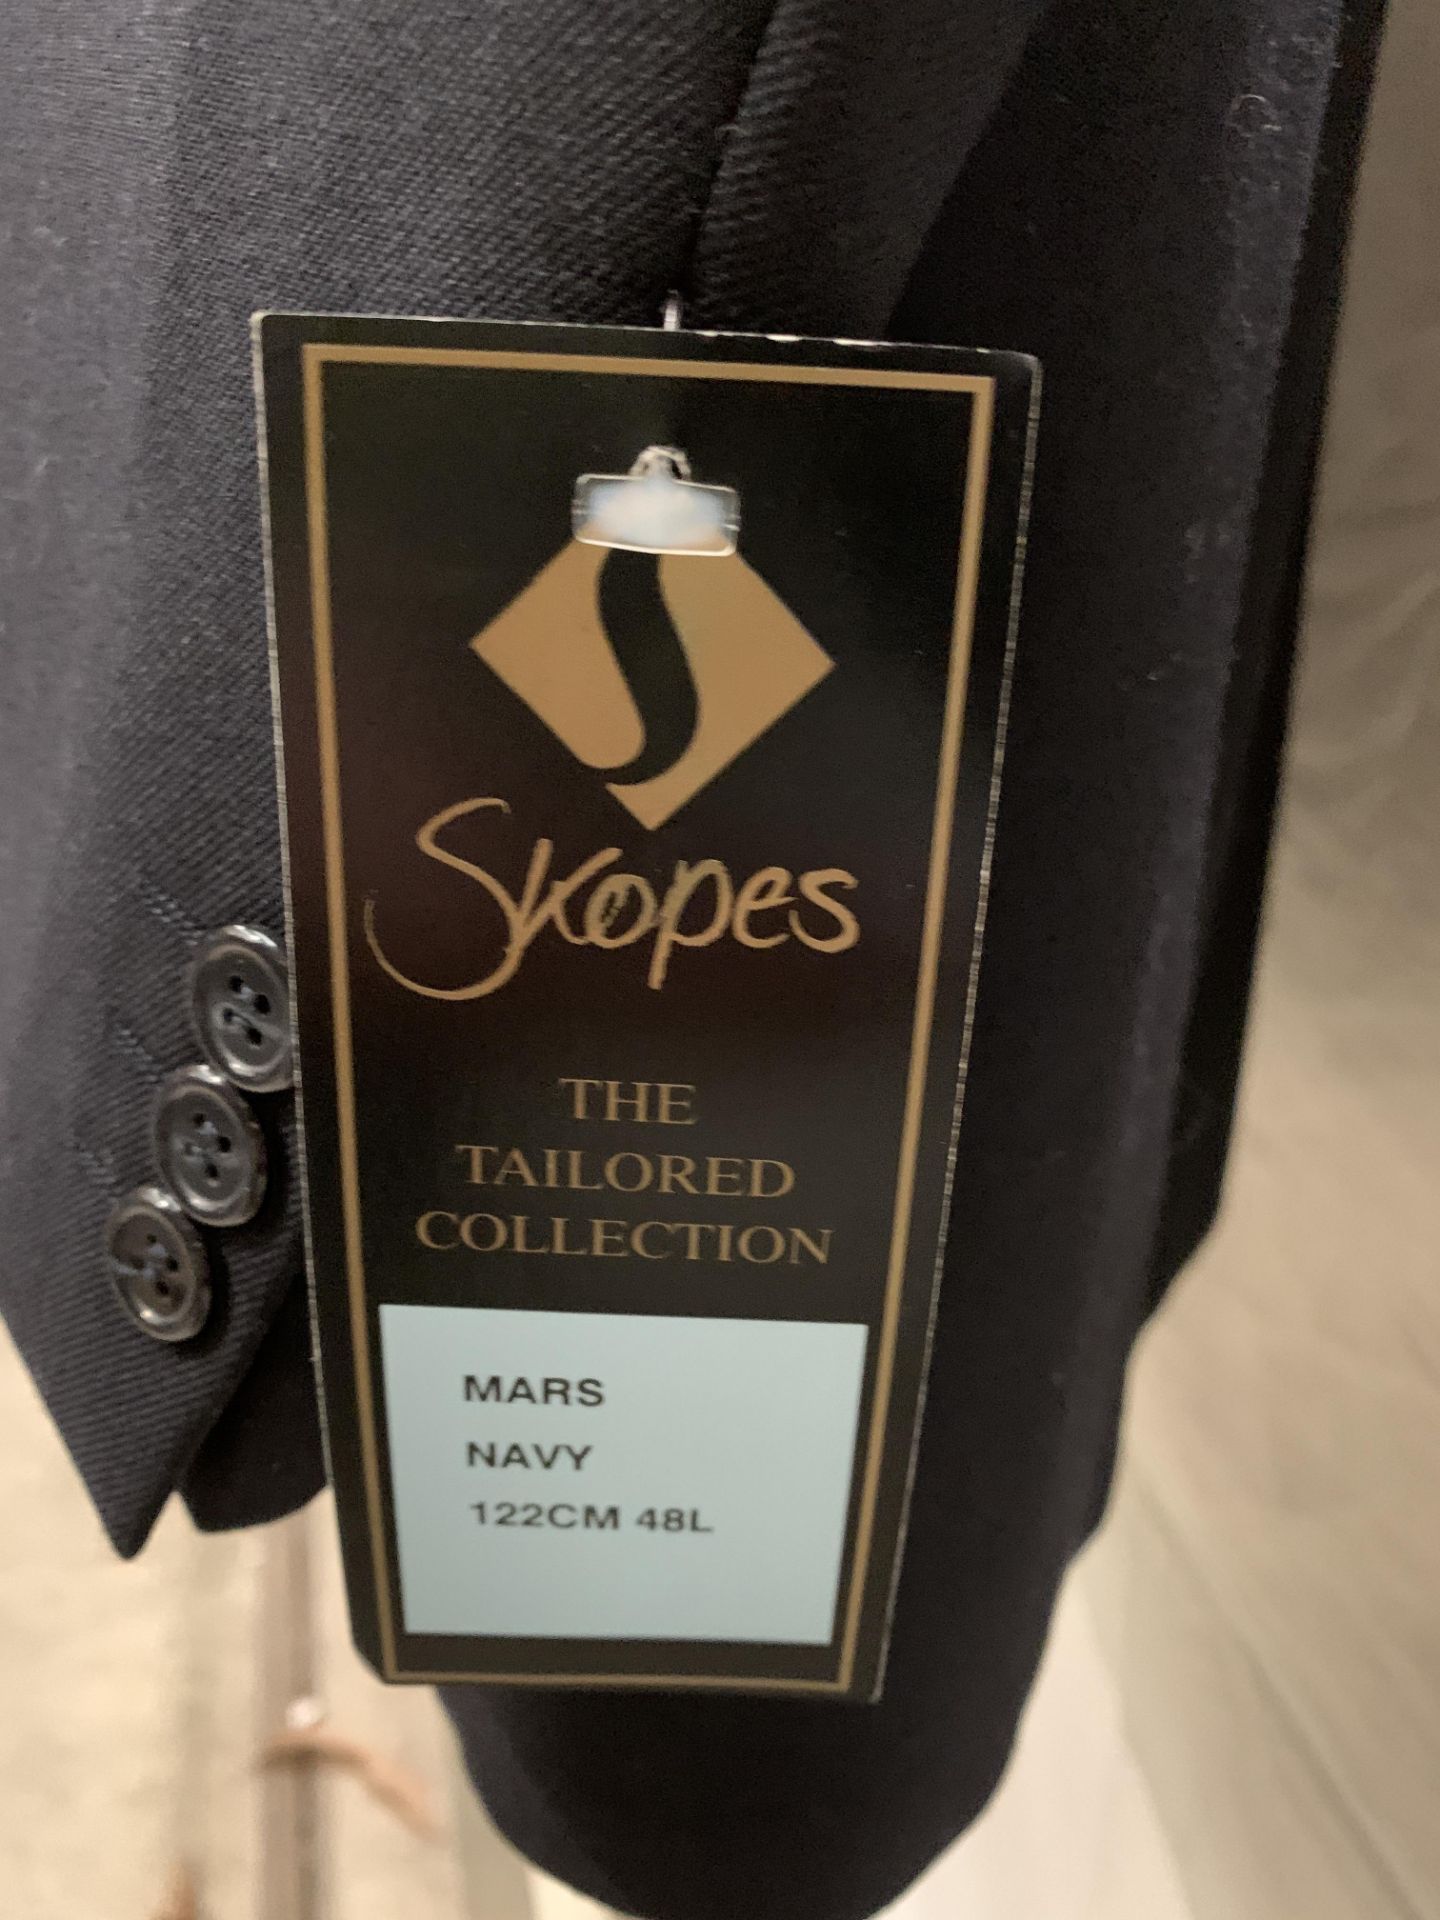 From a deceased estate - a Skopes men's navy double breasted jacket with label still attached - Image 2 of 2